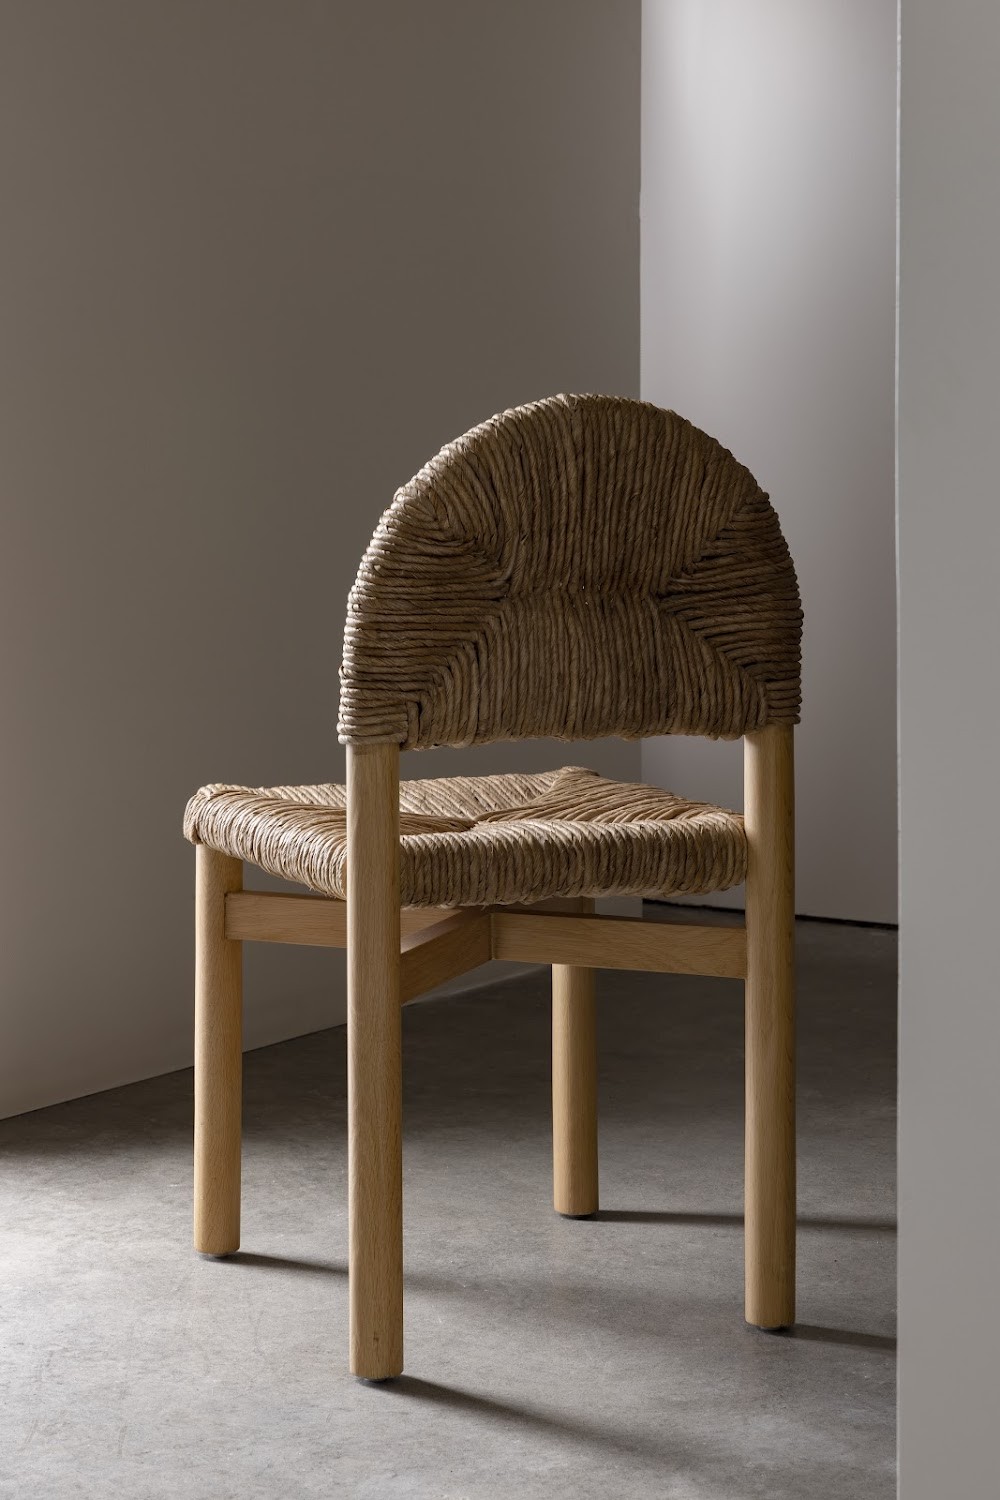 a wooden chair with a woven seat and back